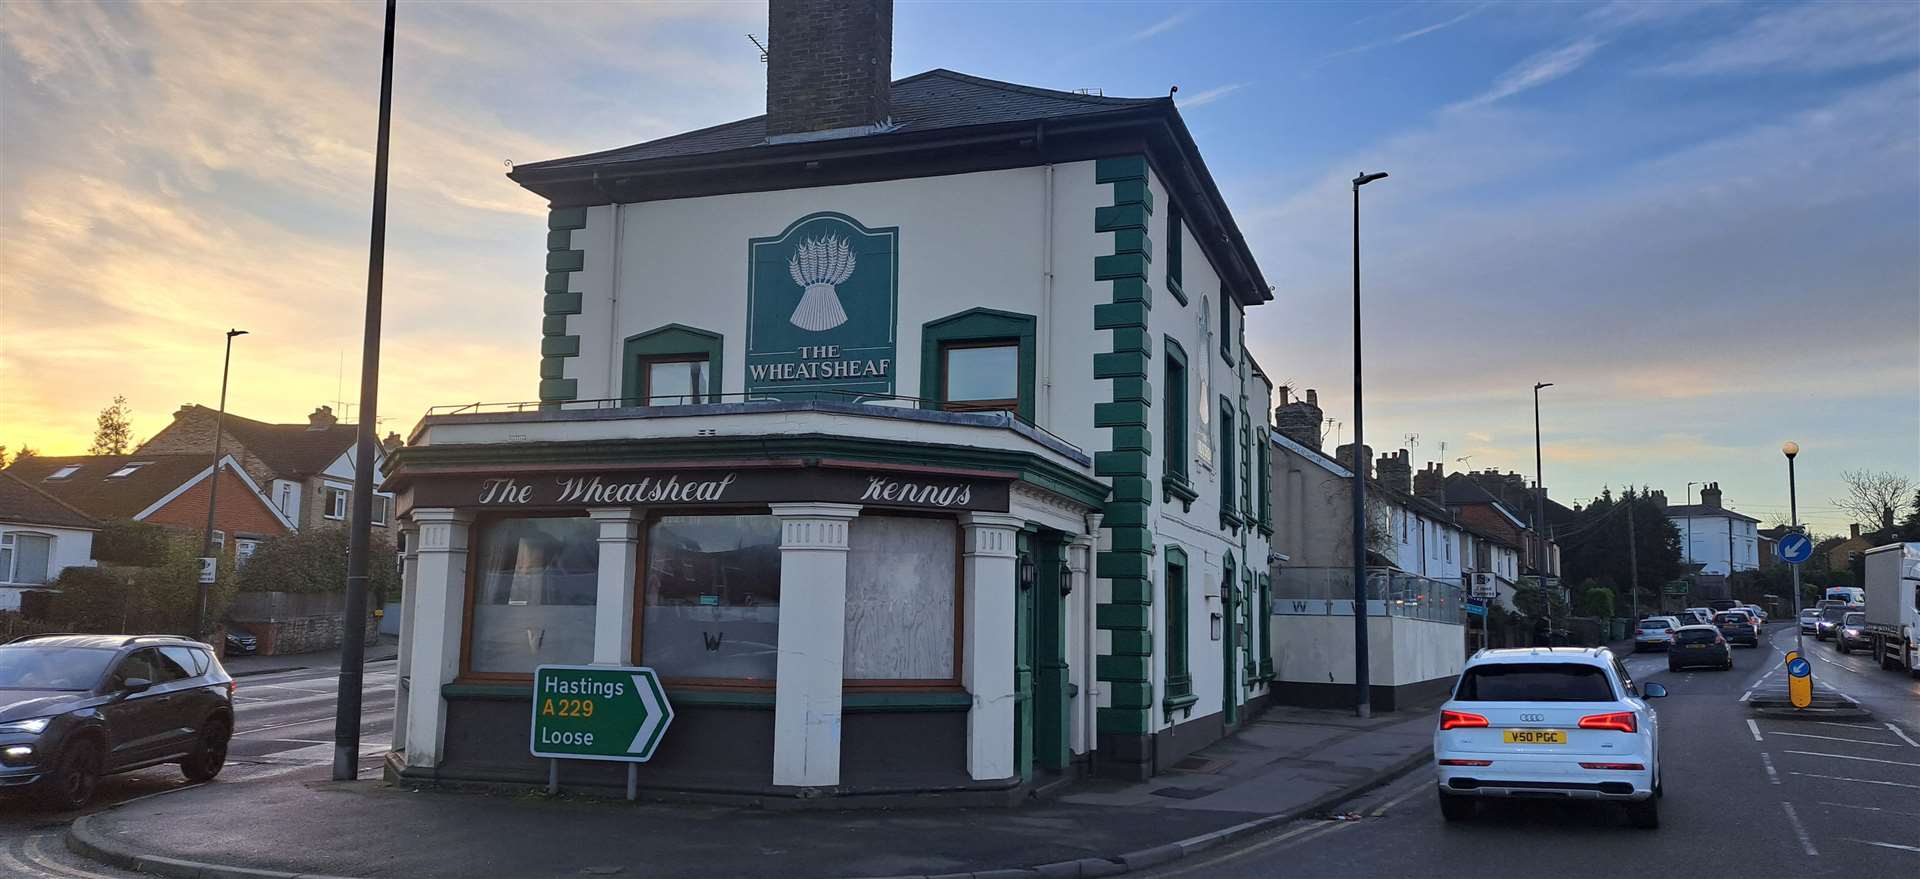 The Wheatsheaf has been empty for five years